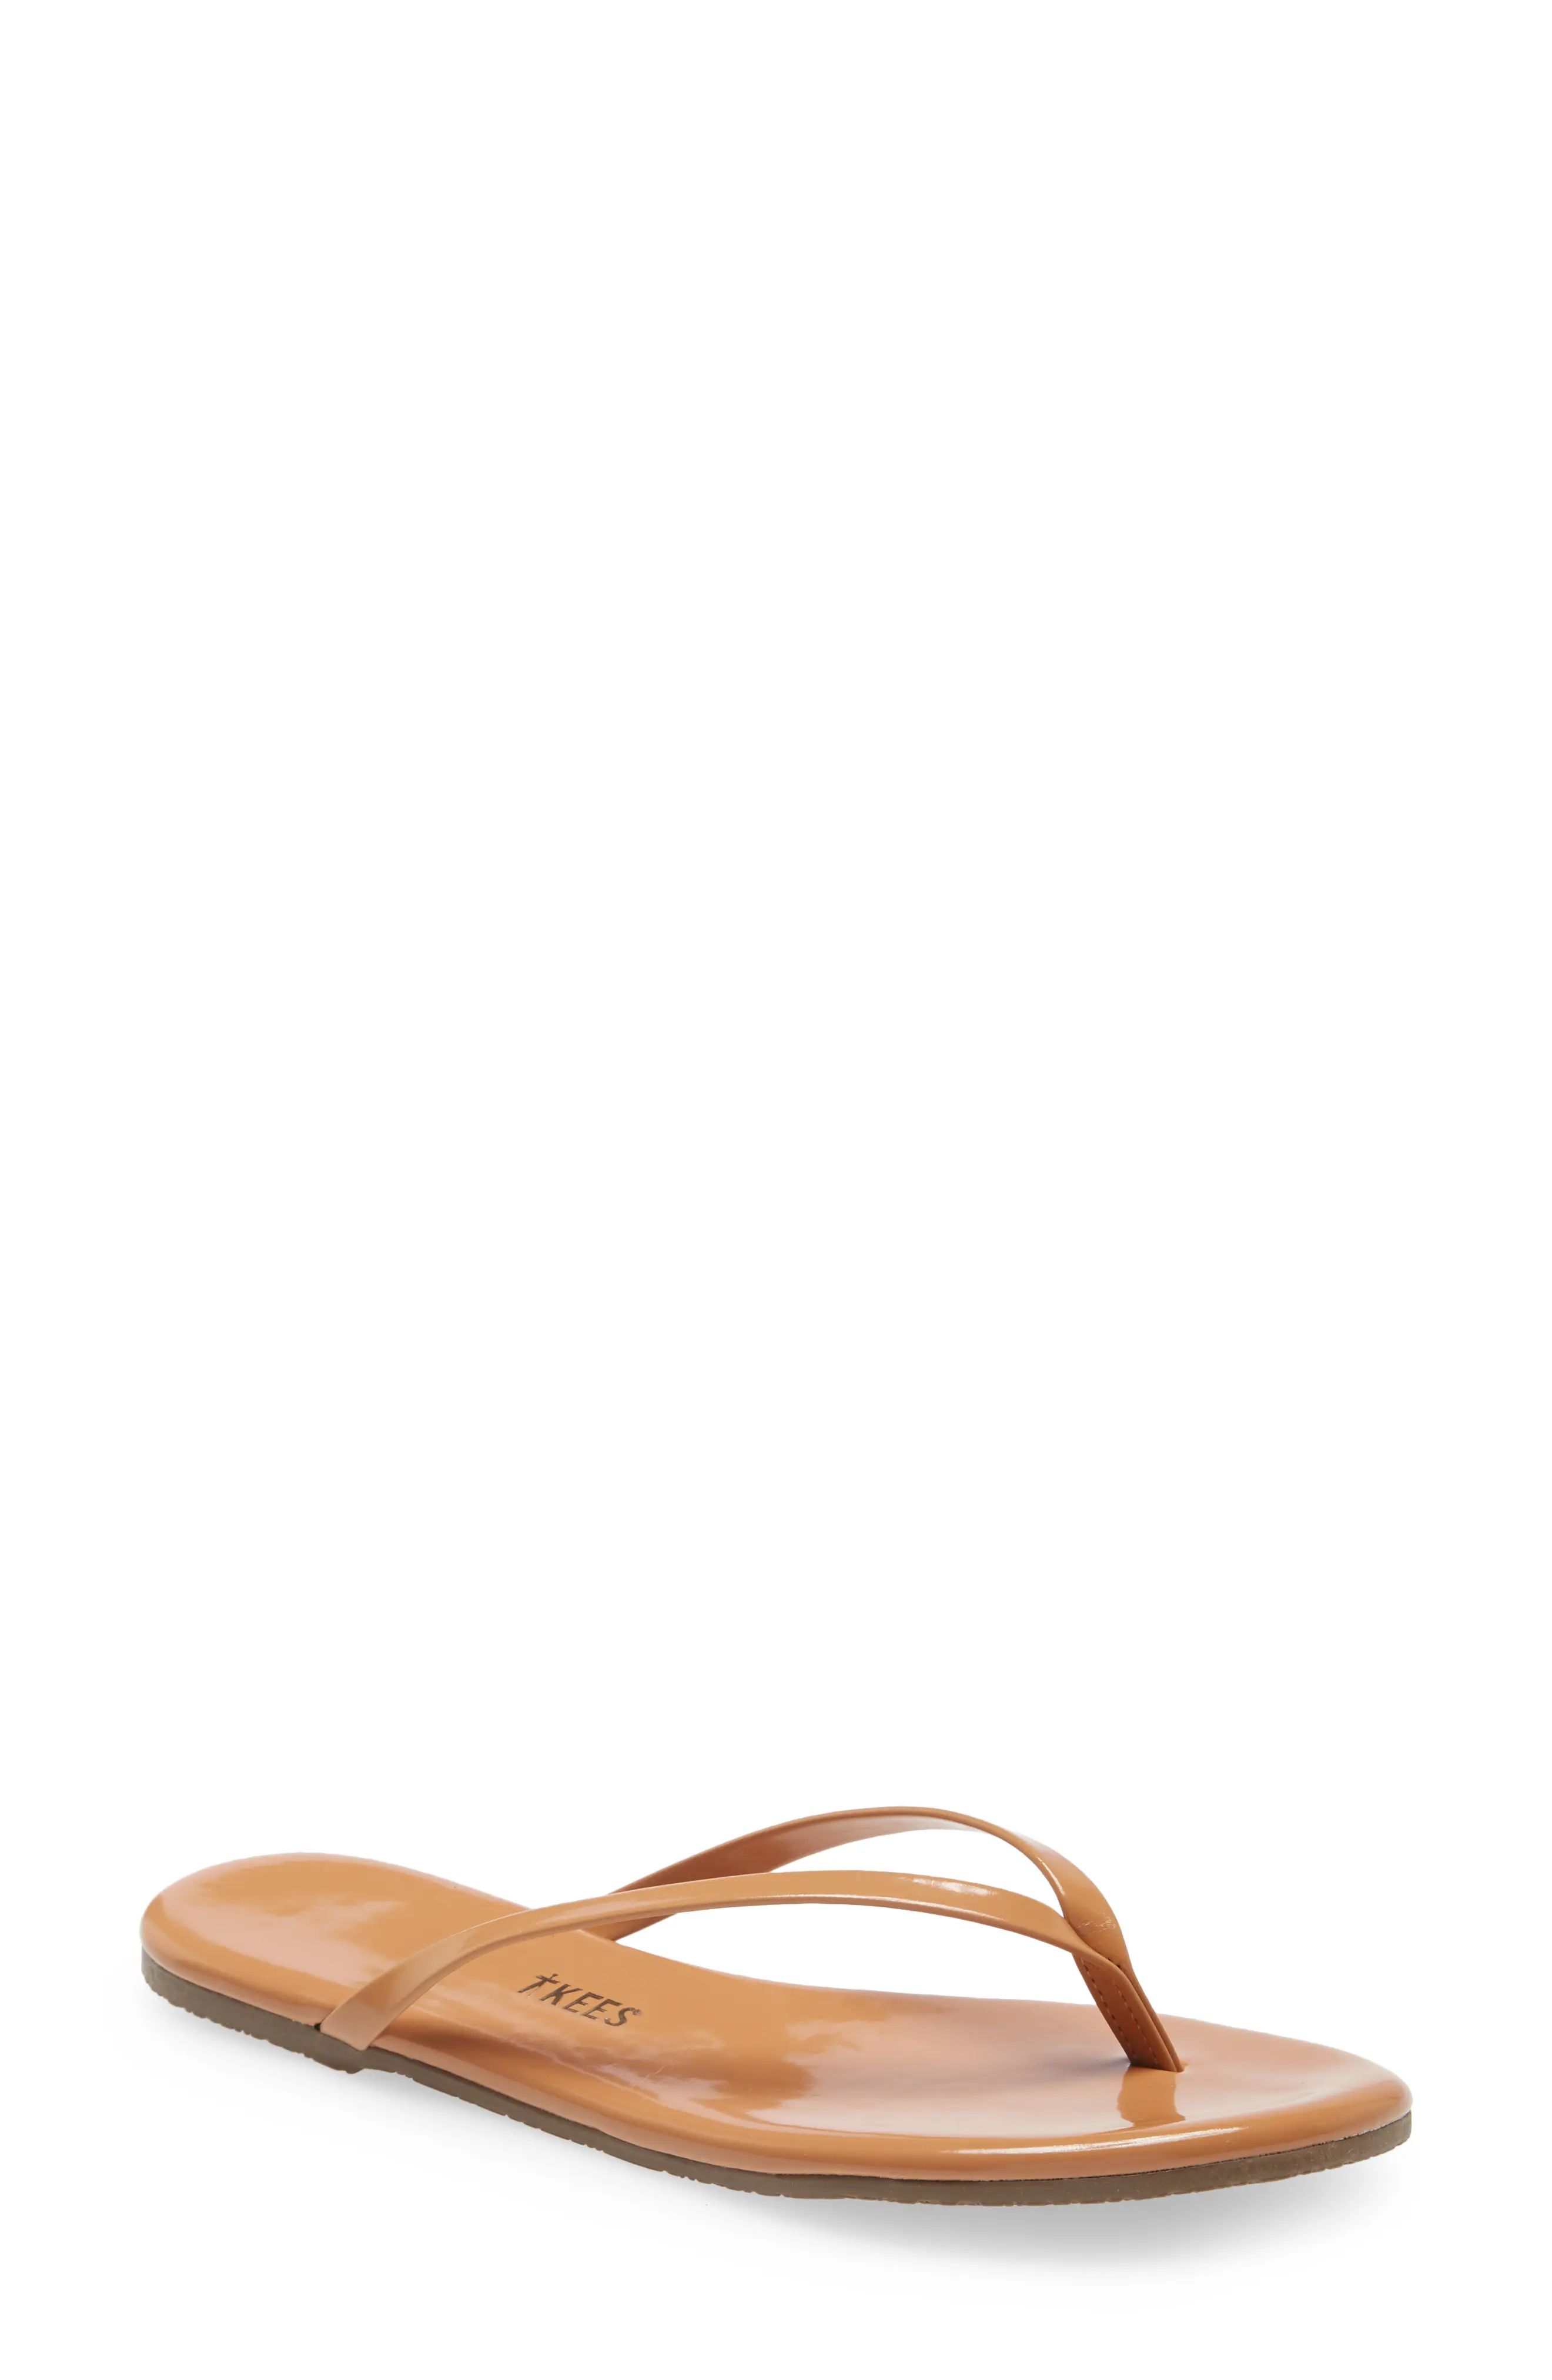 TKEES Foundations Gloss Flip Flop in Sun Bliss at Nordstrom, Size 8 | Nordstrom